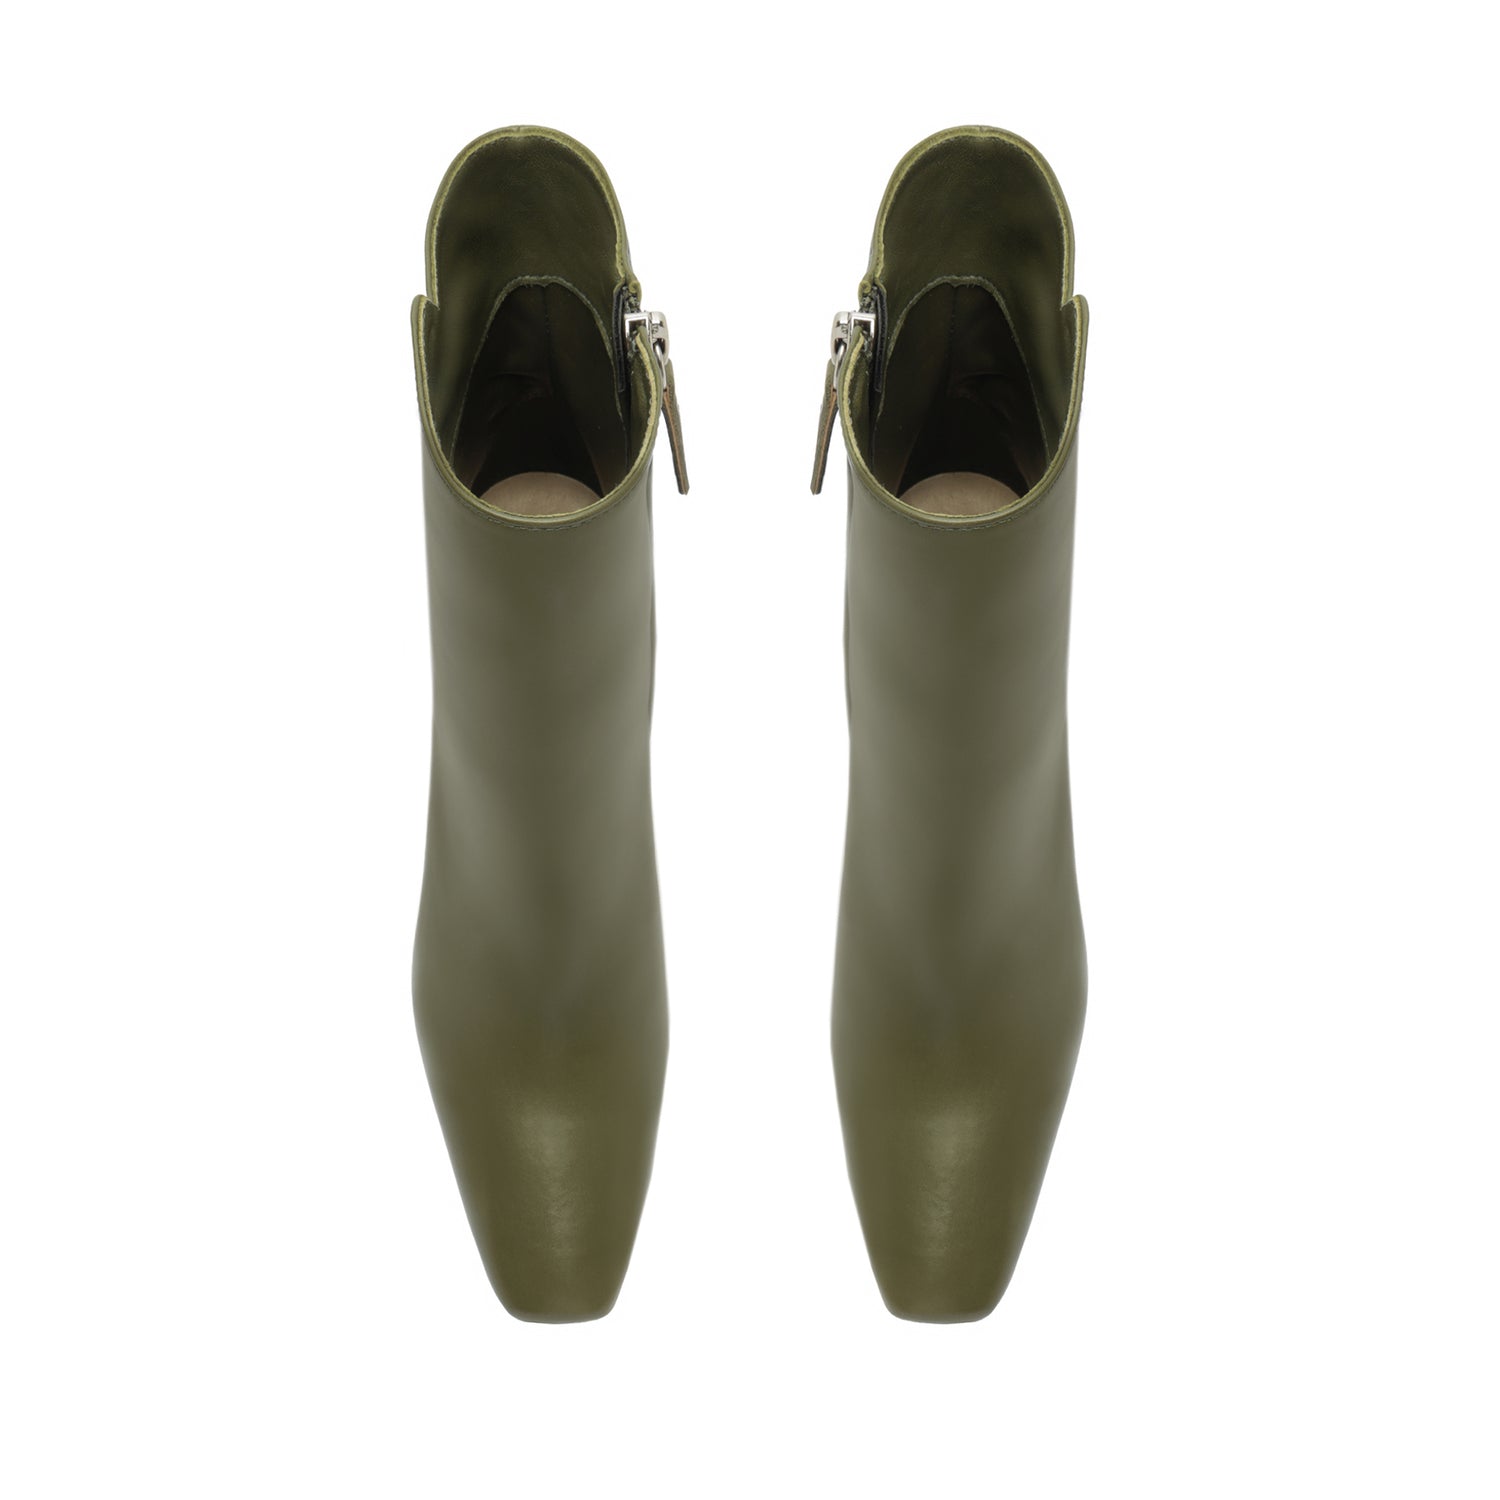 Christine Nappa Leather Bootie Military Green Nappa Leather